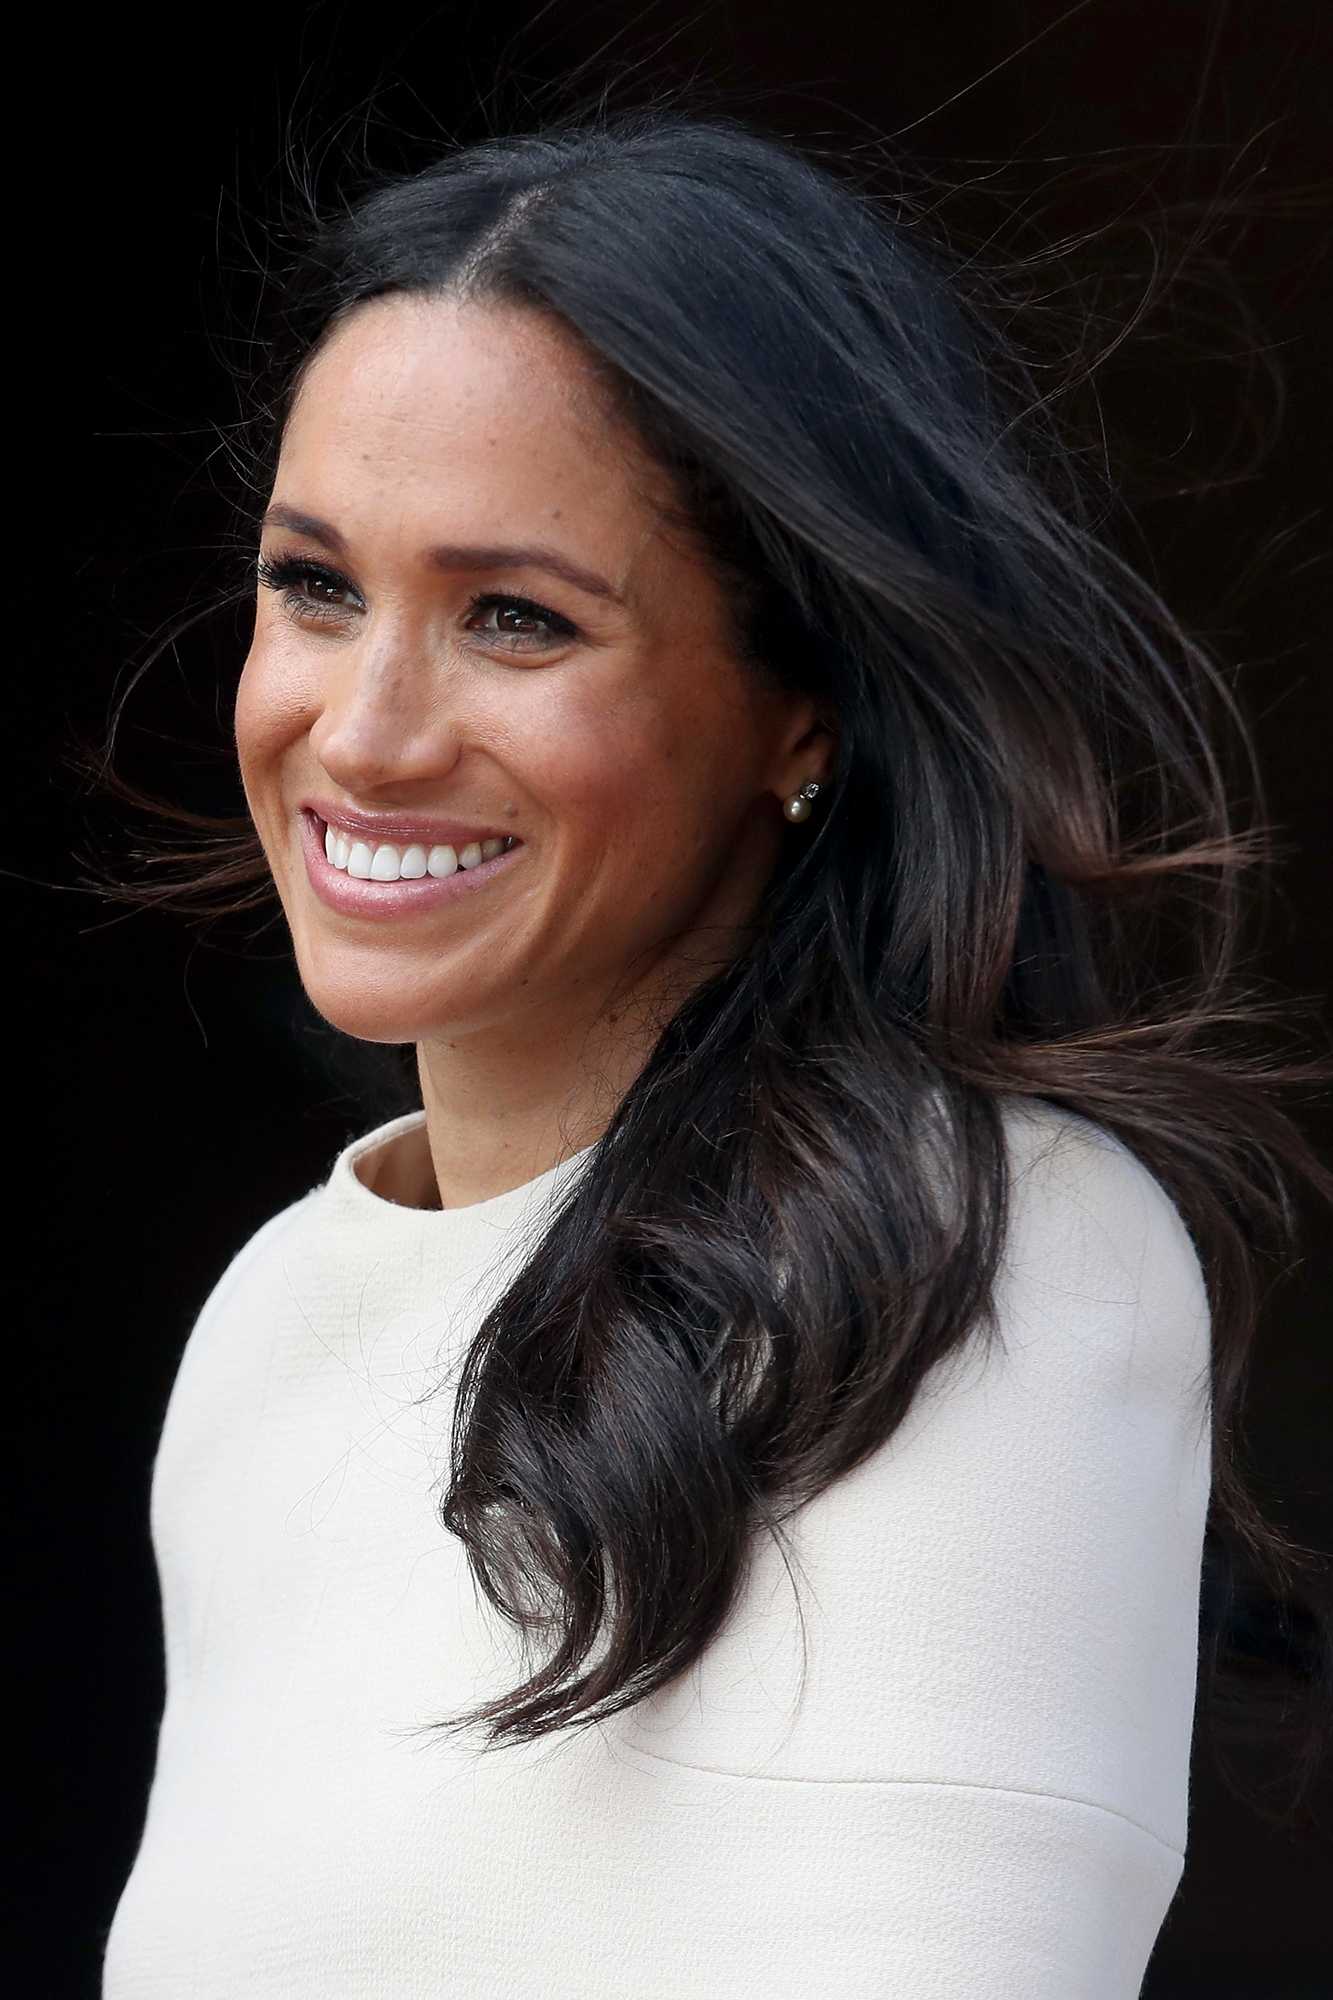 70+ Hot Pictures Of Meghan Markle Which Are Just Too Hot To Handle 650